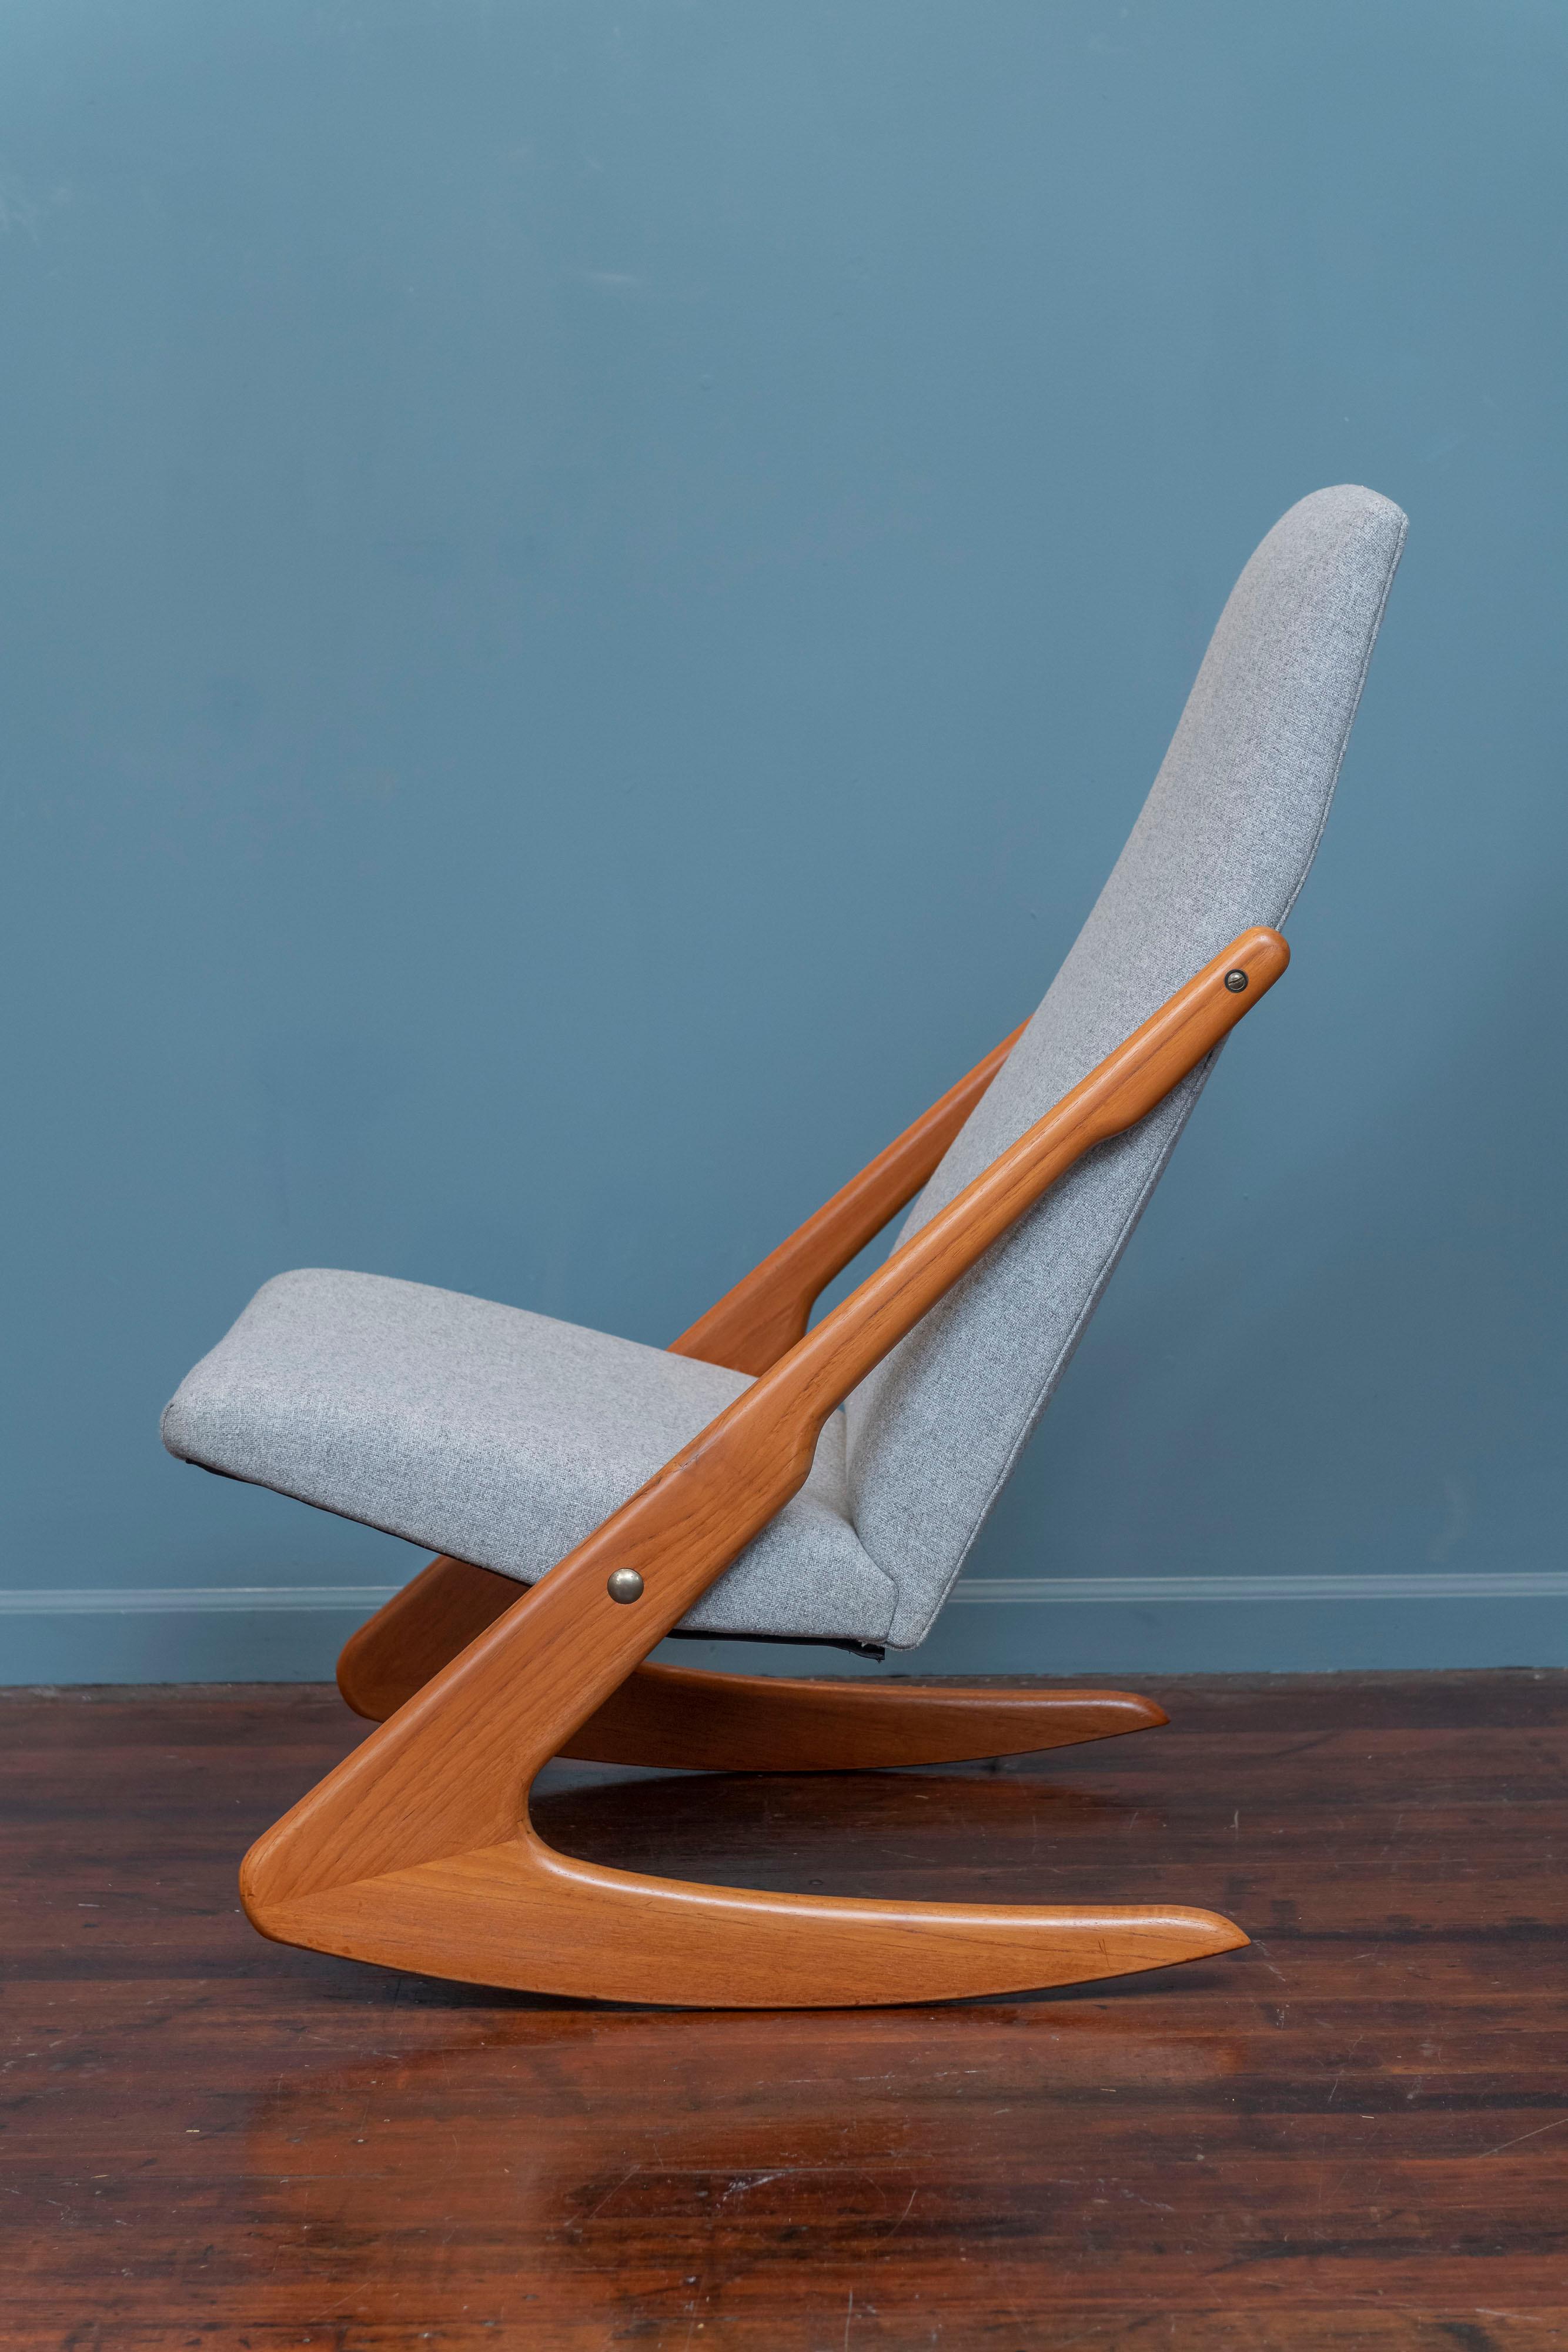 Mogens Kold design teak rocking chair, Denmark. Newly refinished and upholstered in a light grey wool, ready to rock!